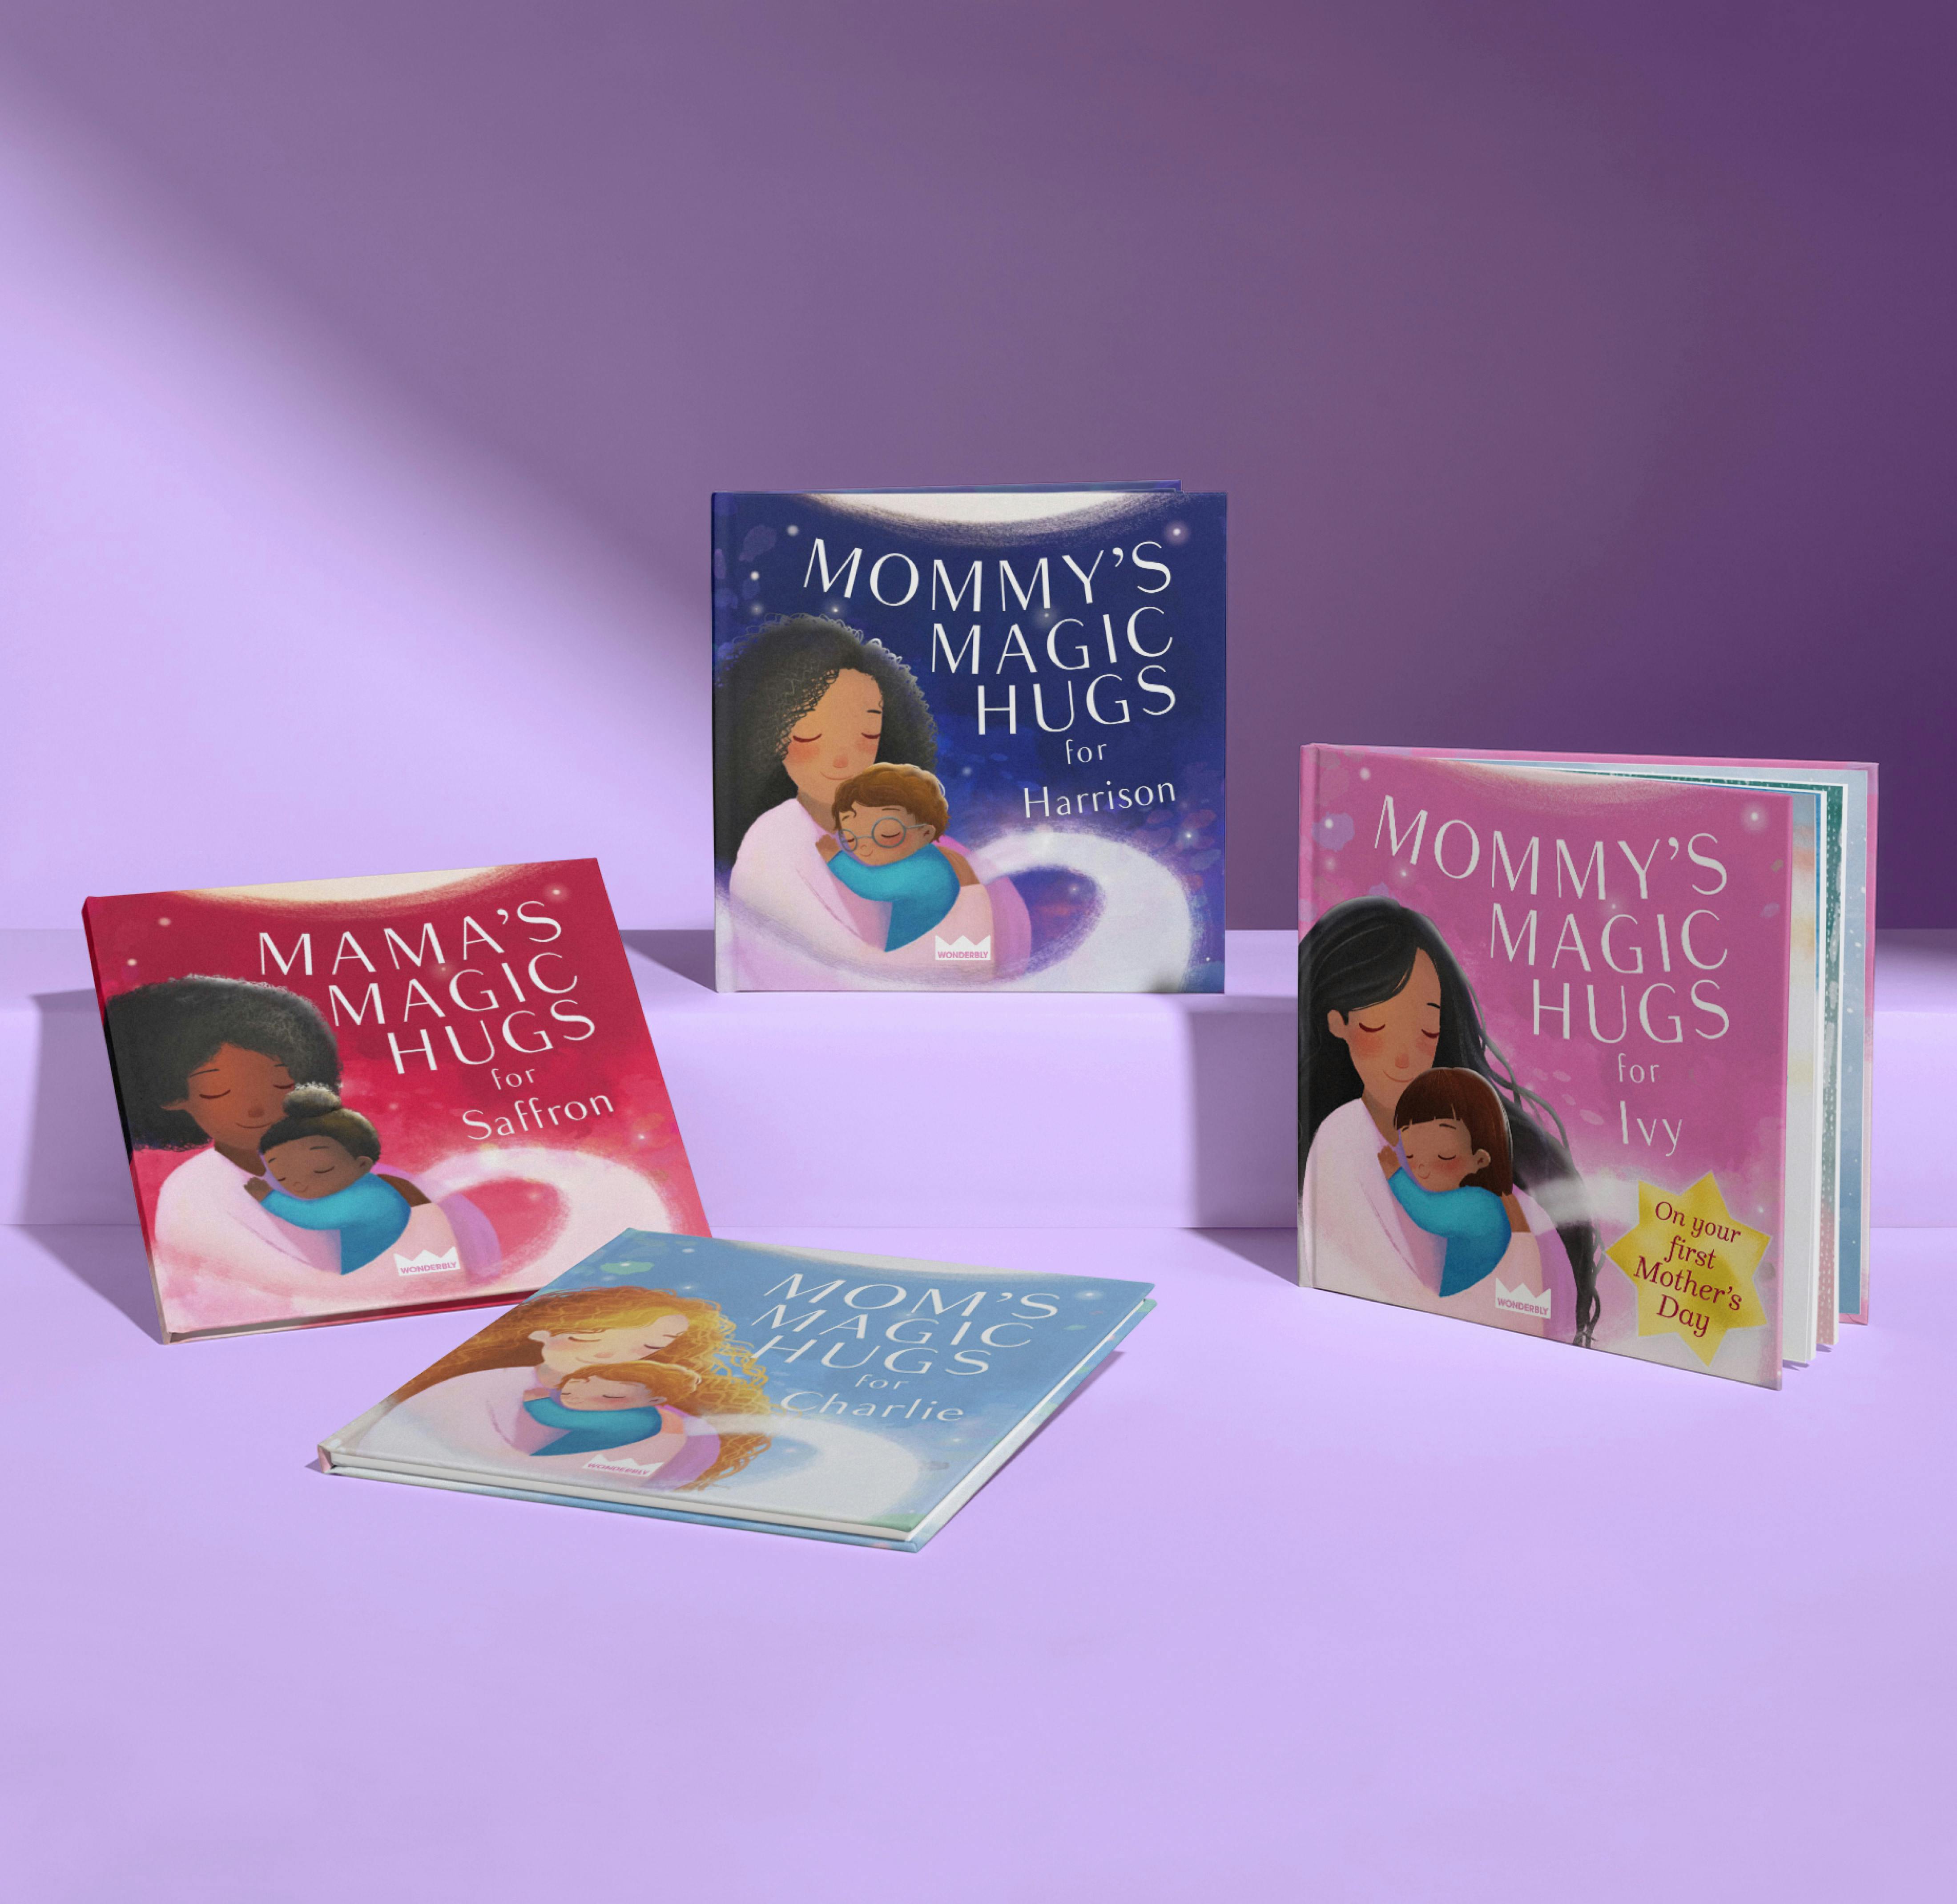 mommy's magic hugs book with different colours and special edition cover